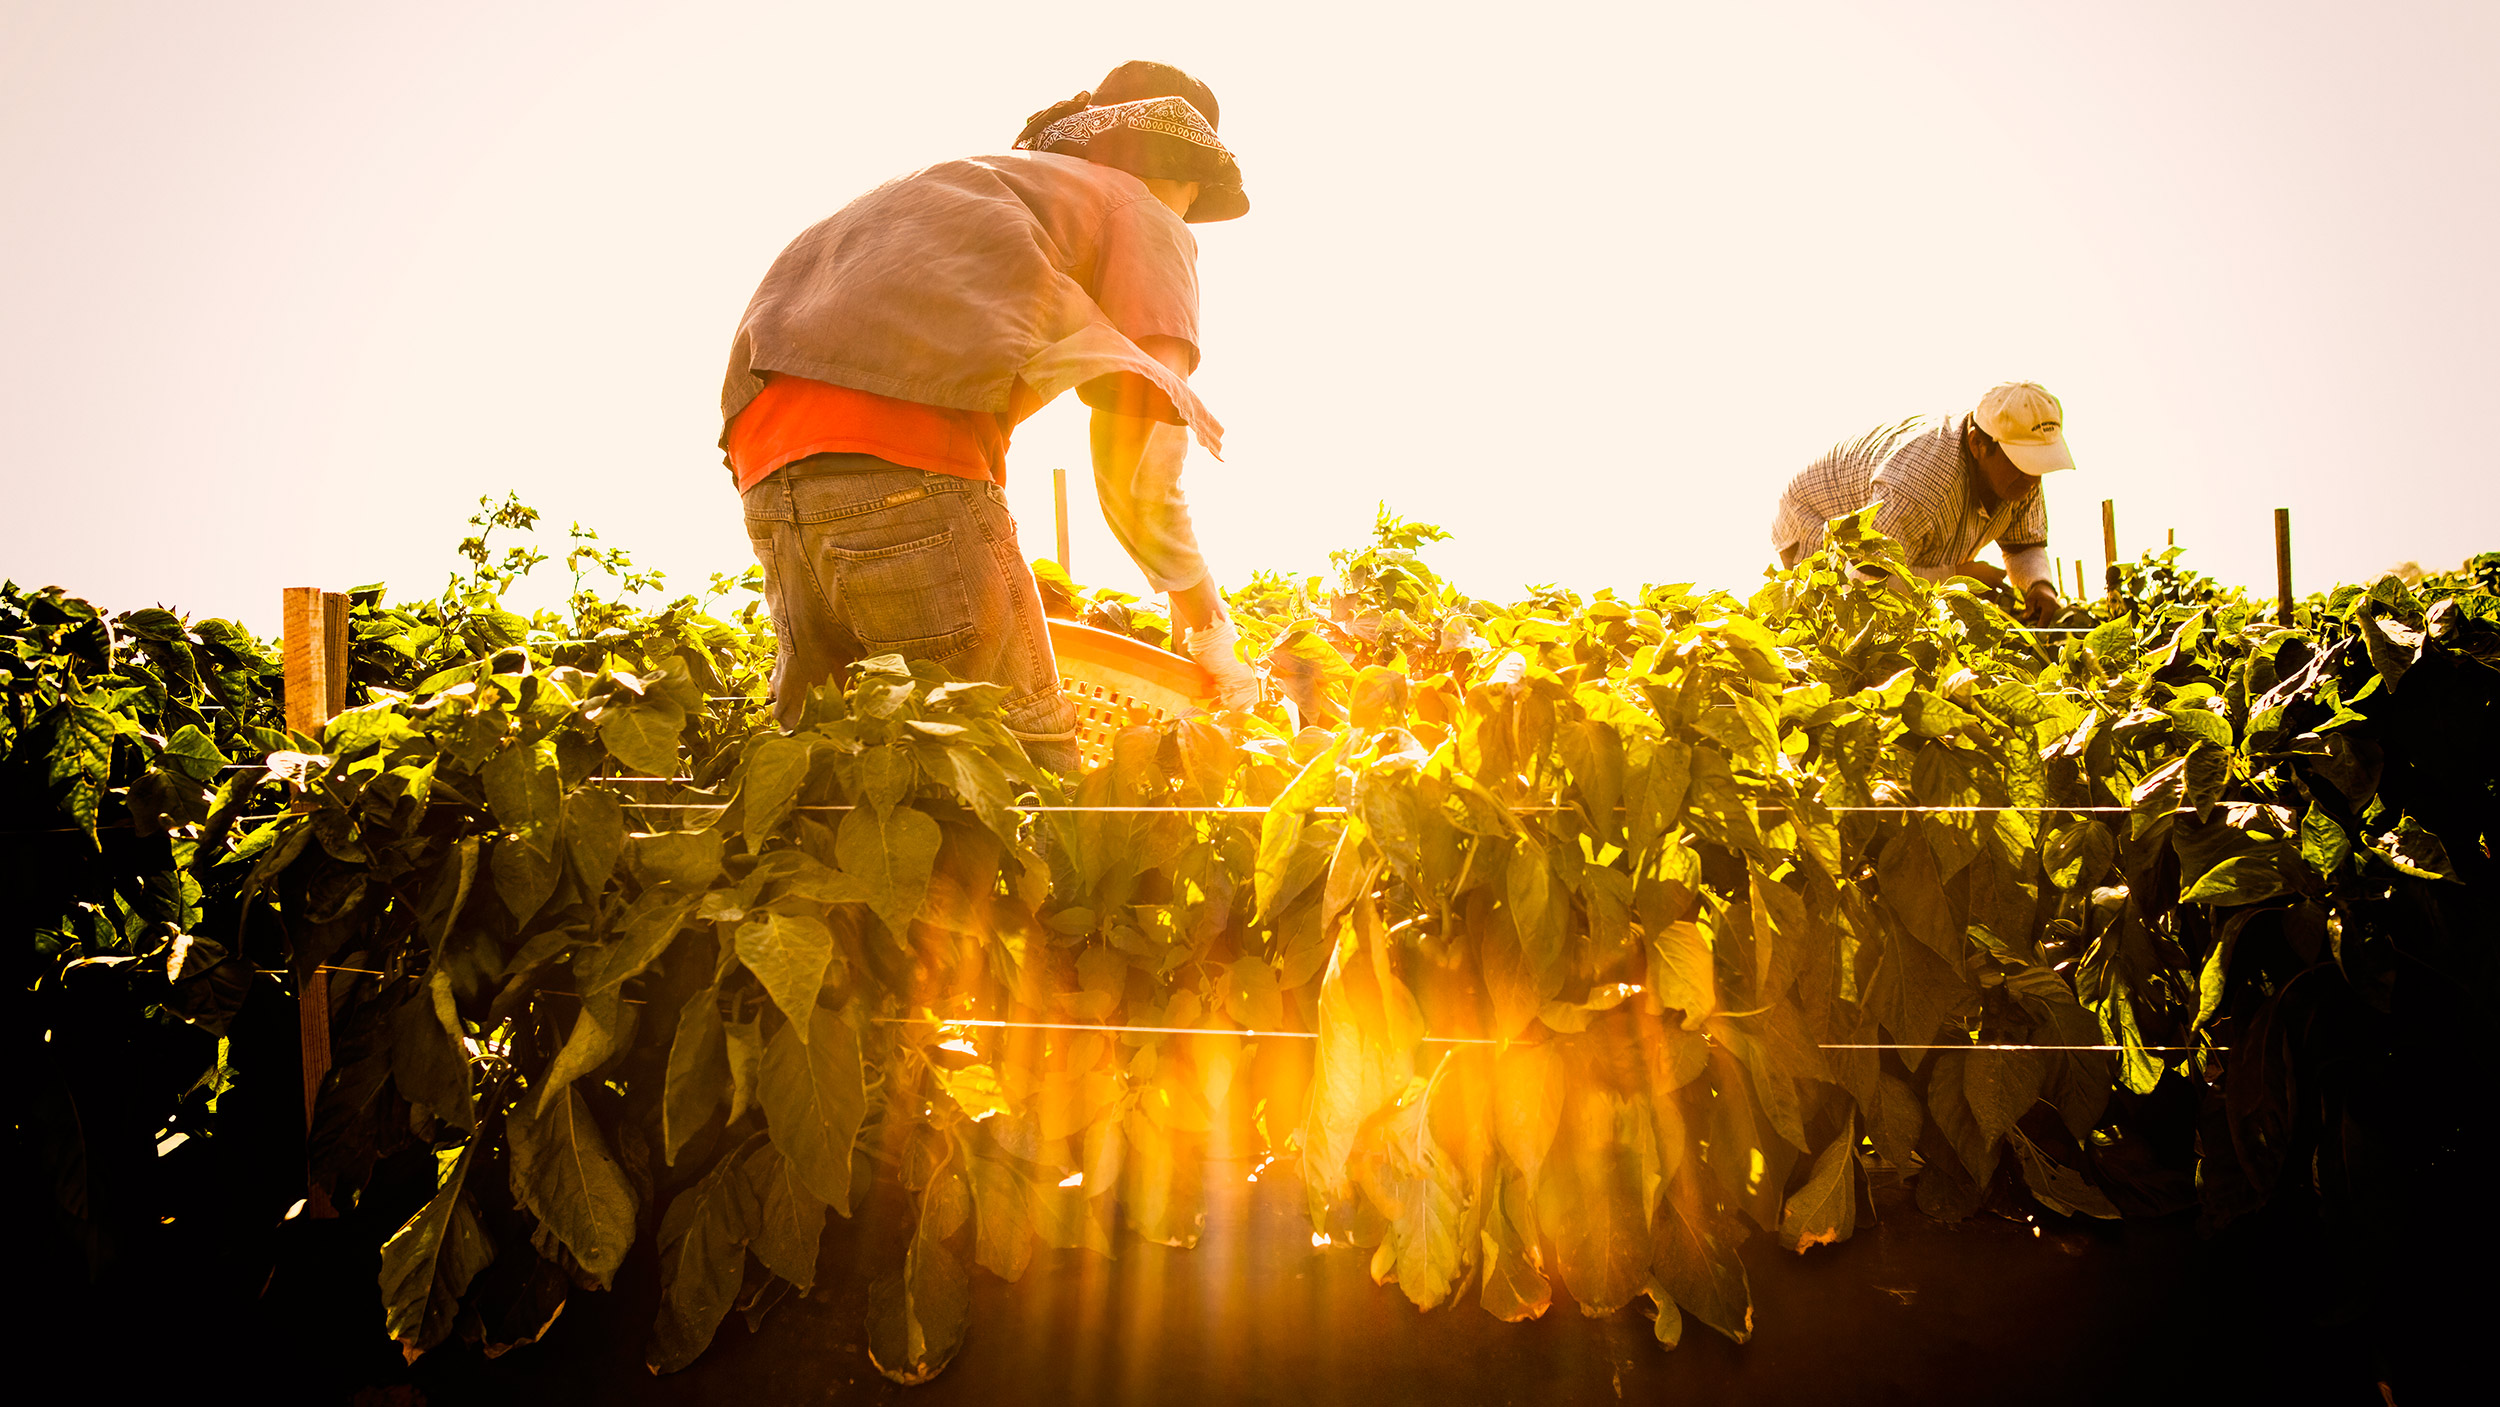 agriculture photography two crop pickers harvesting peppers with sun flare